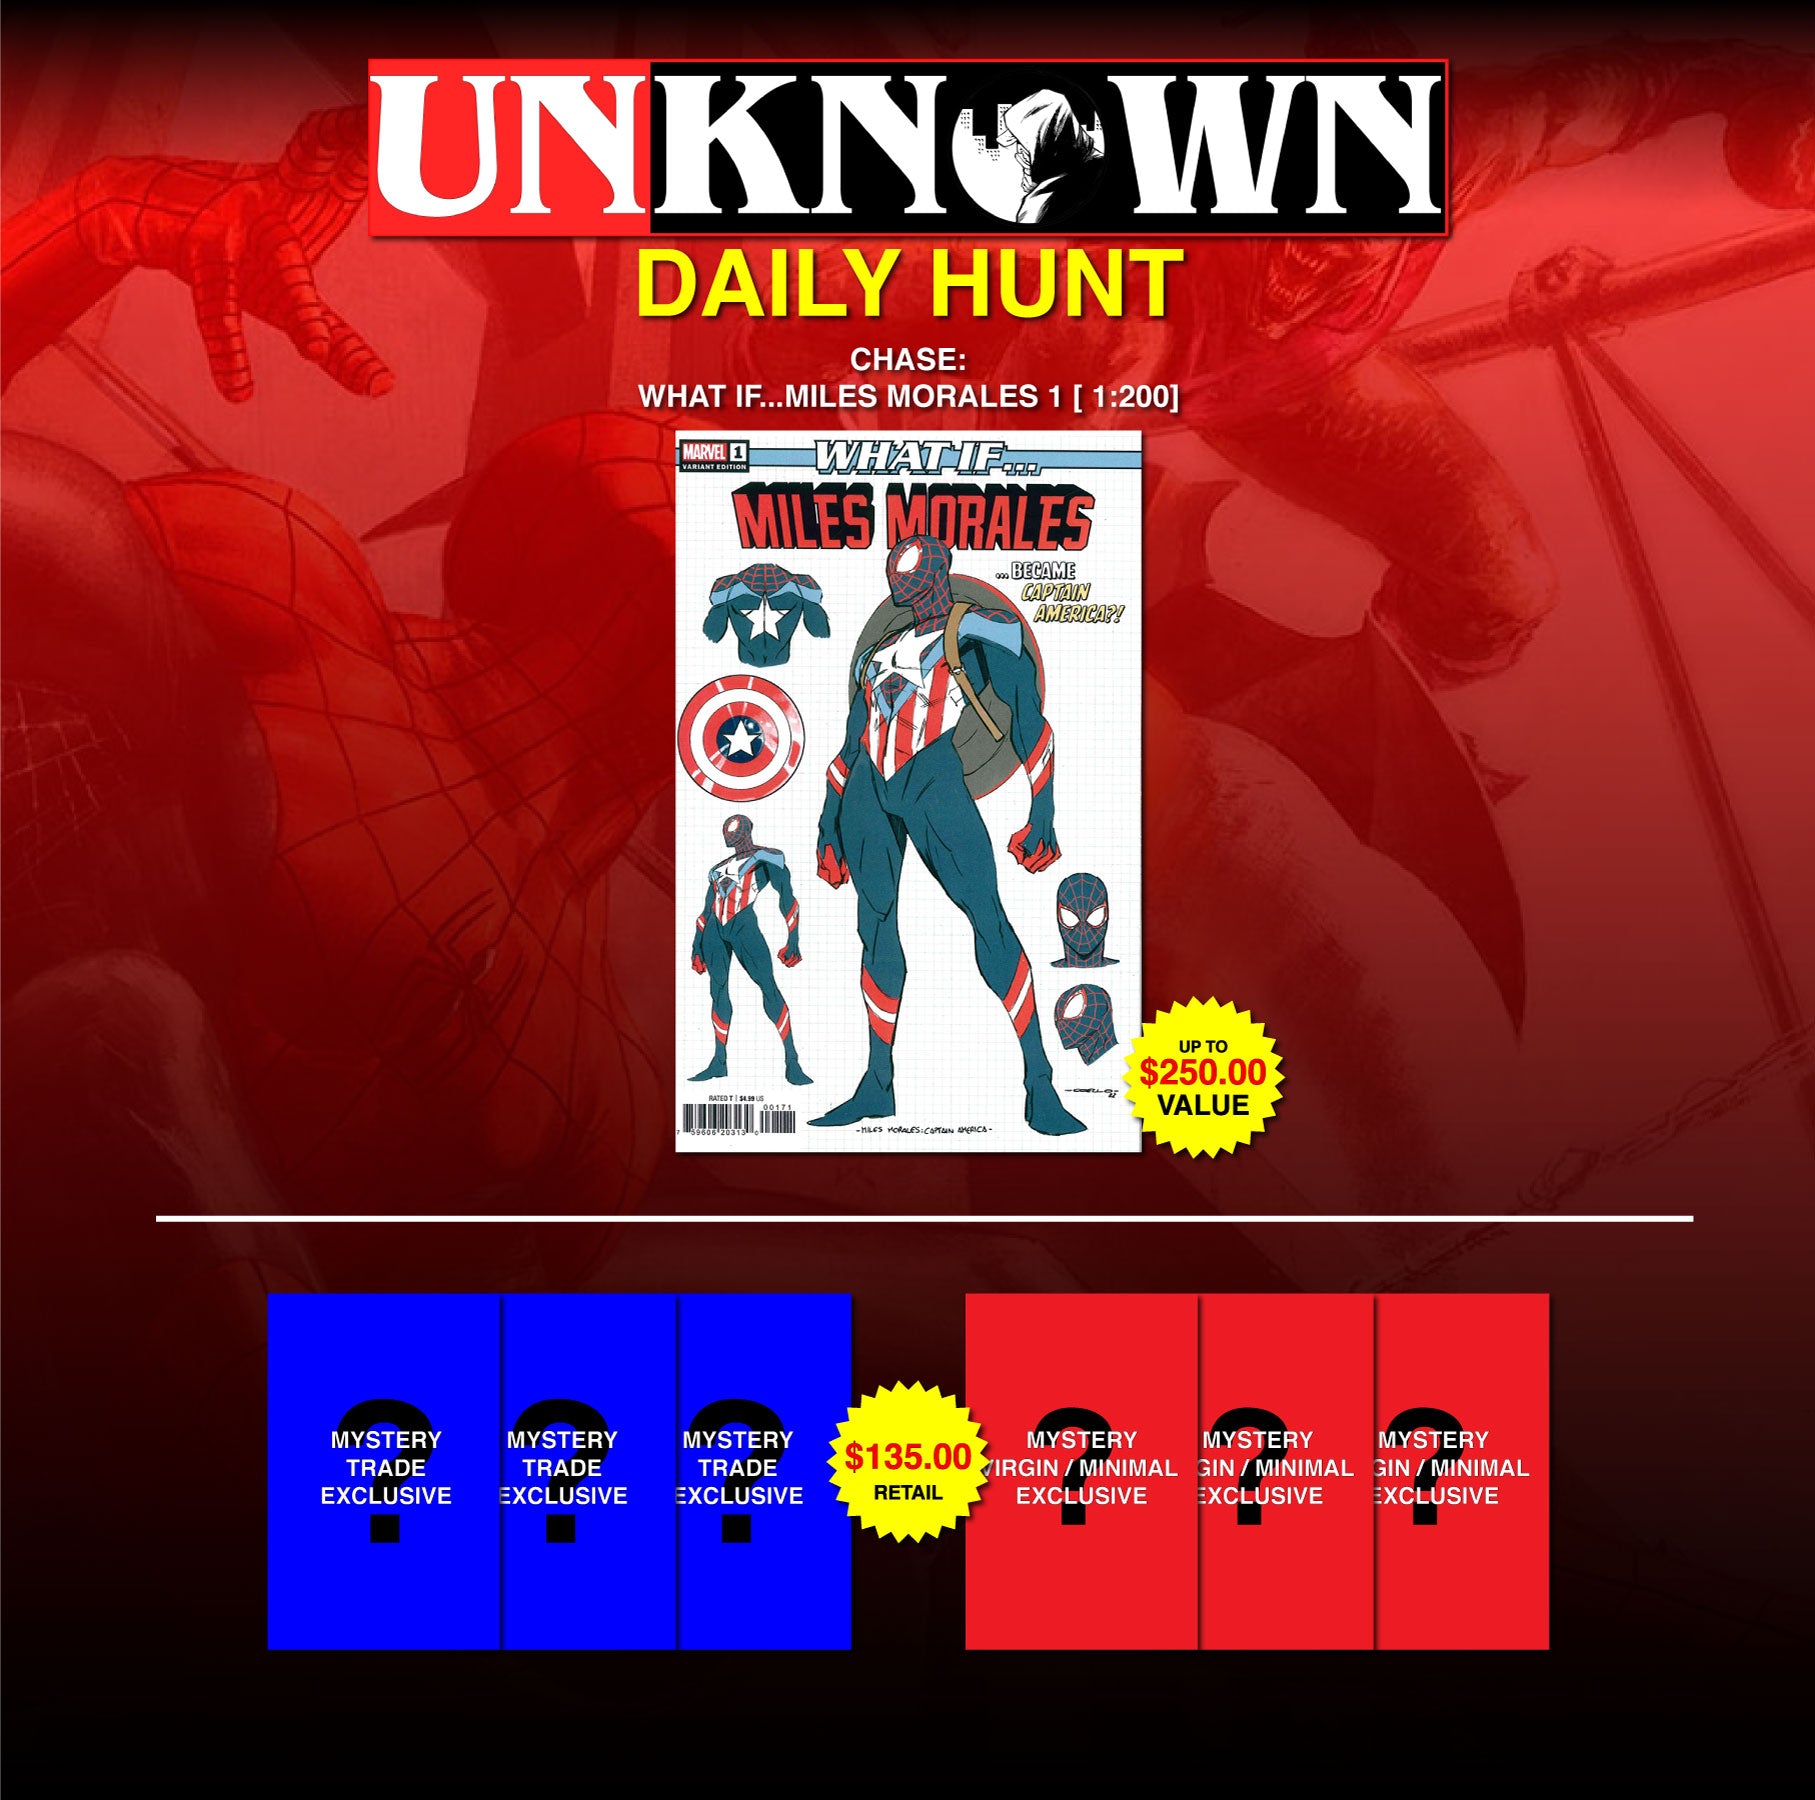 DAILY MYSTERY HUNT W/ CHASE (WHAT IF...MILES MORALES 1 [ 1:200]) DAY 2 (05/04/2022)